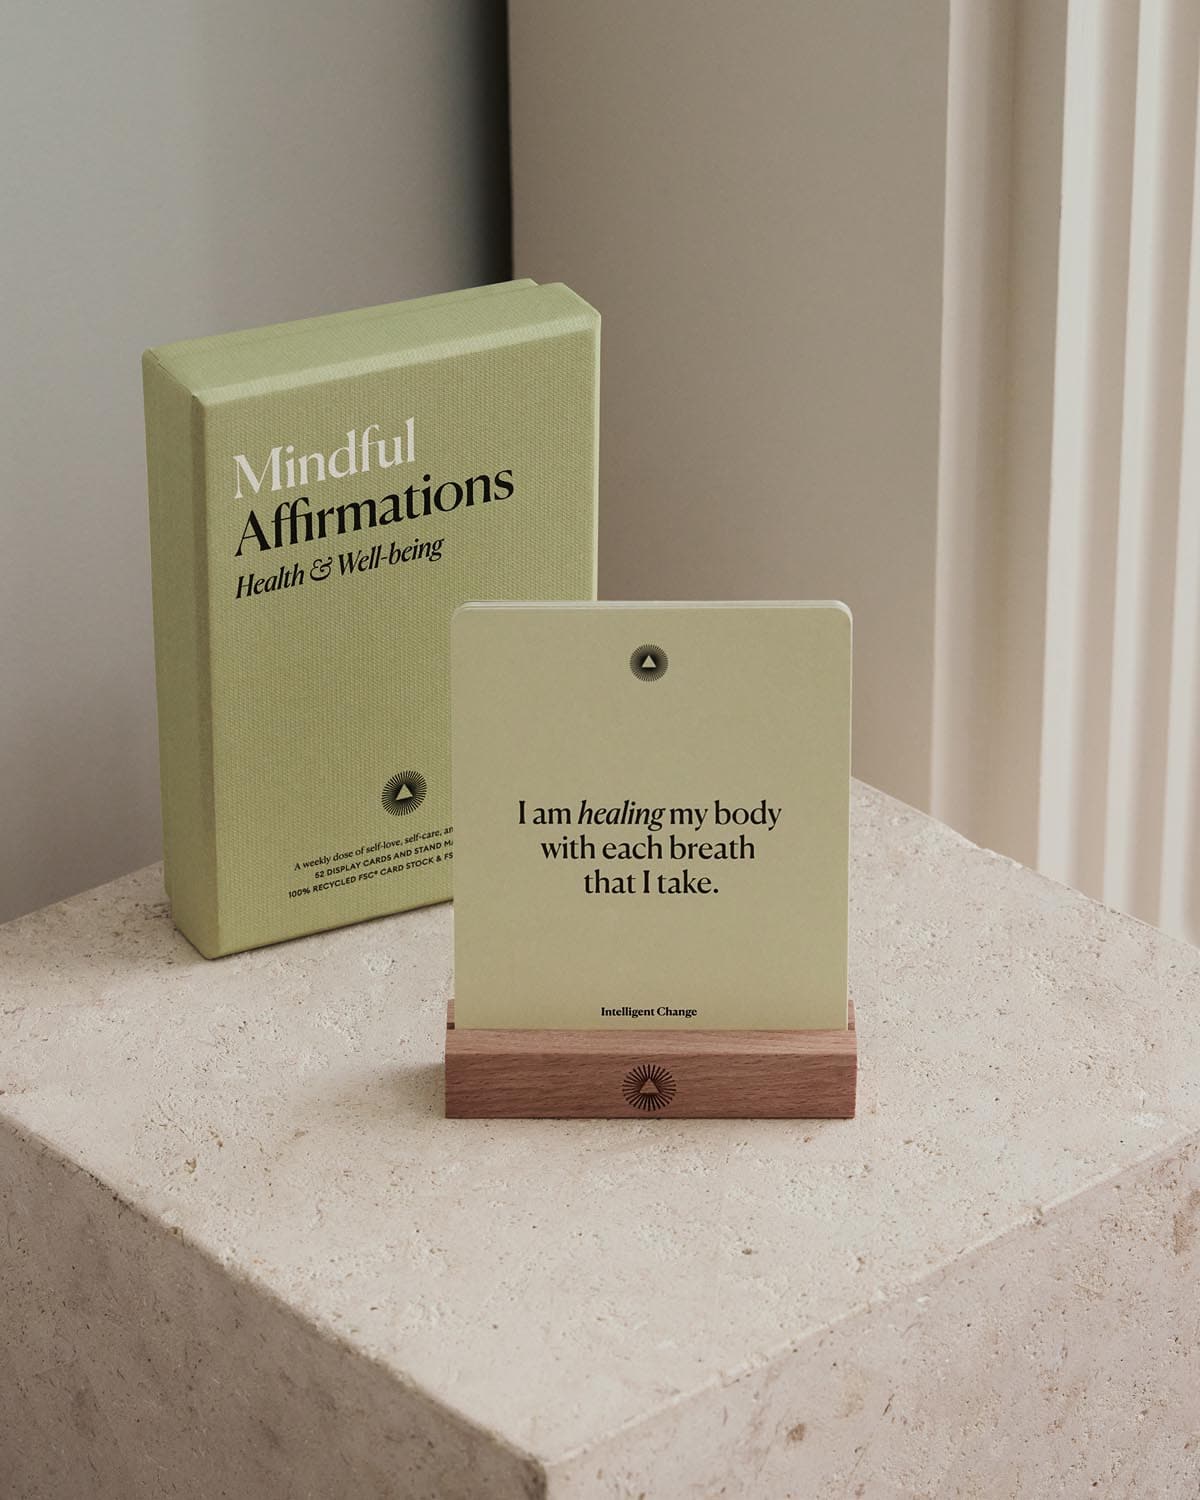 Intelligent Change Mindful Affirmations for Health & Wellbeing